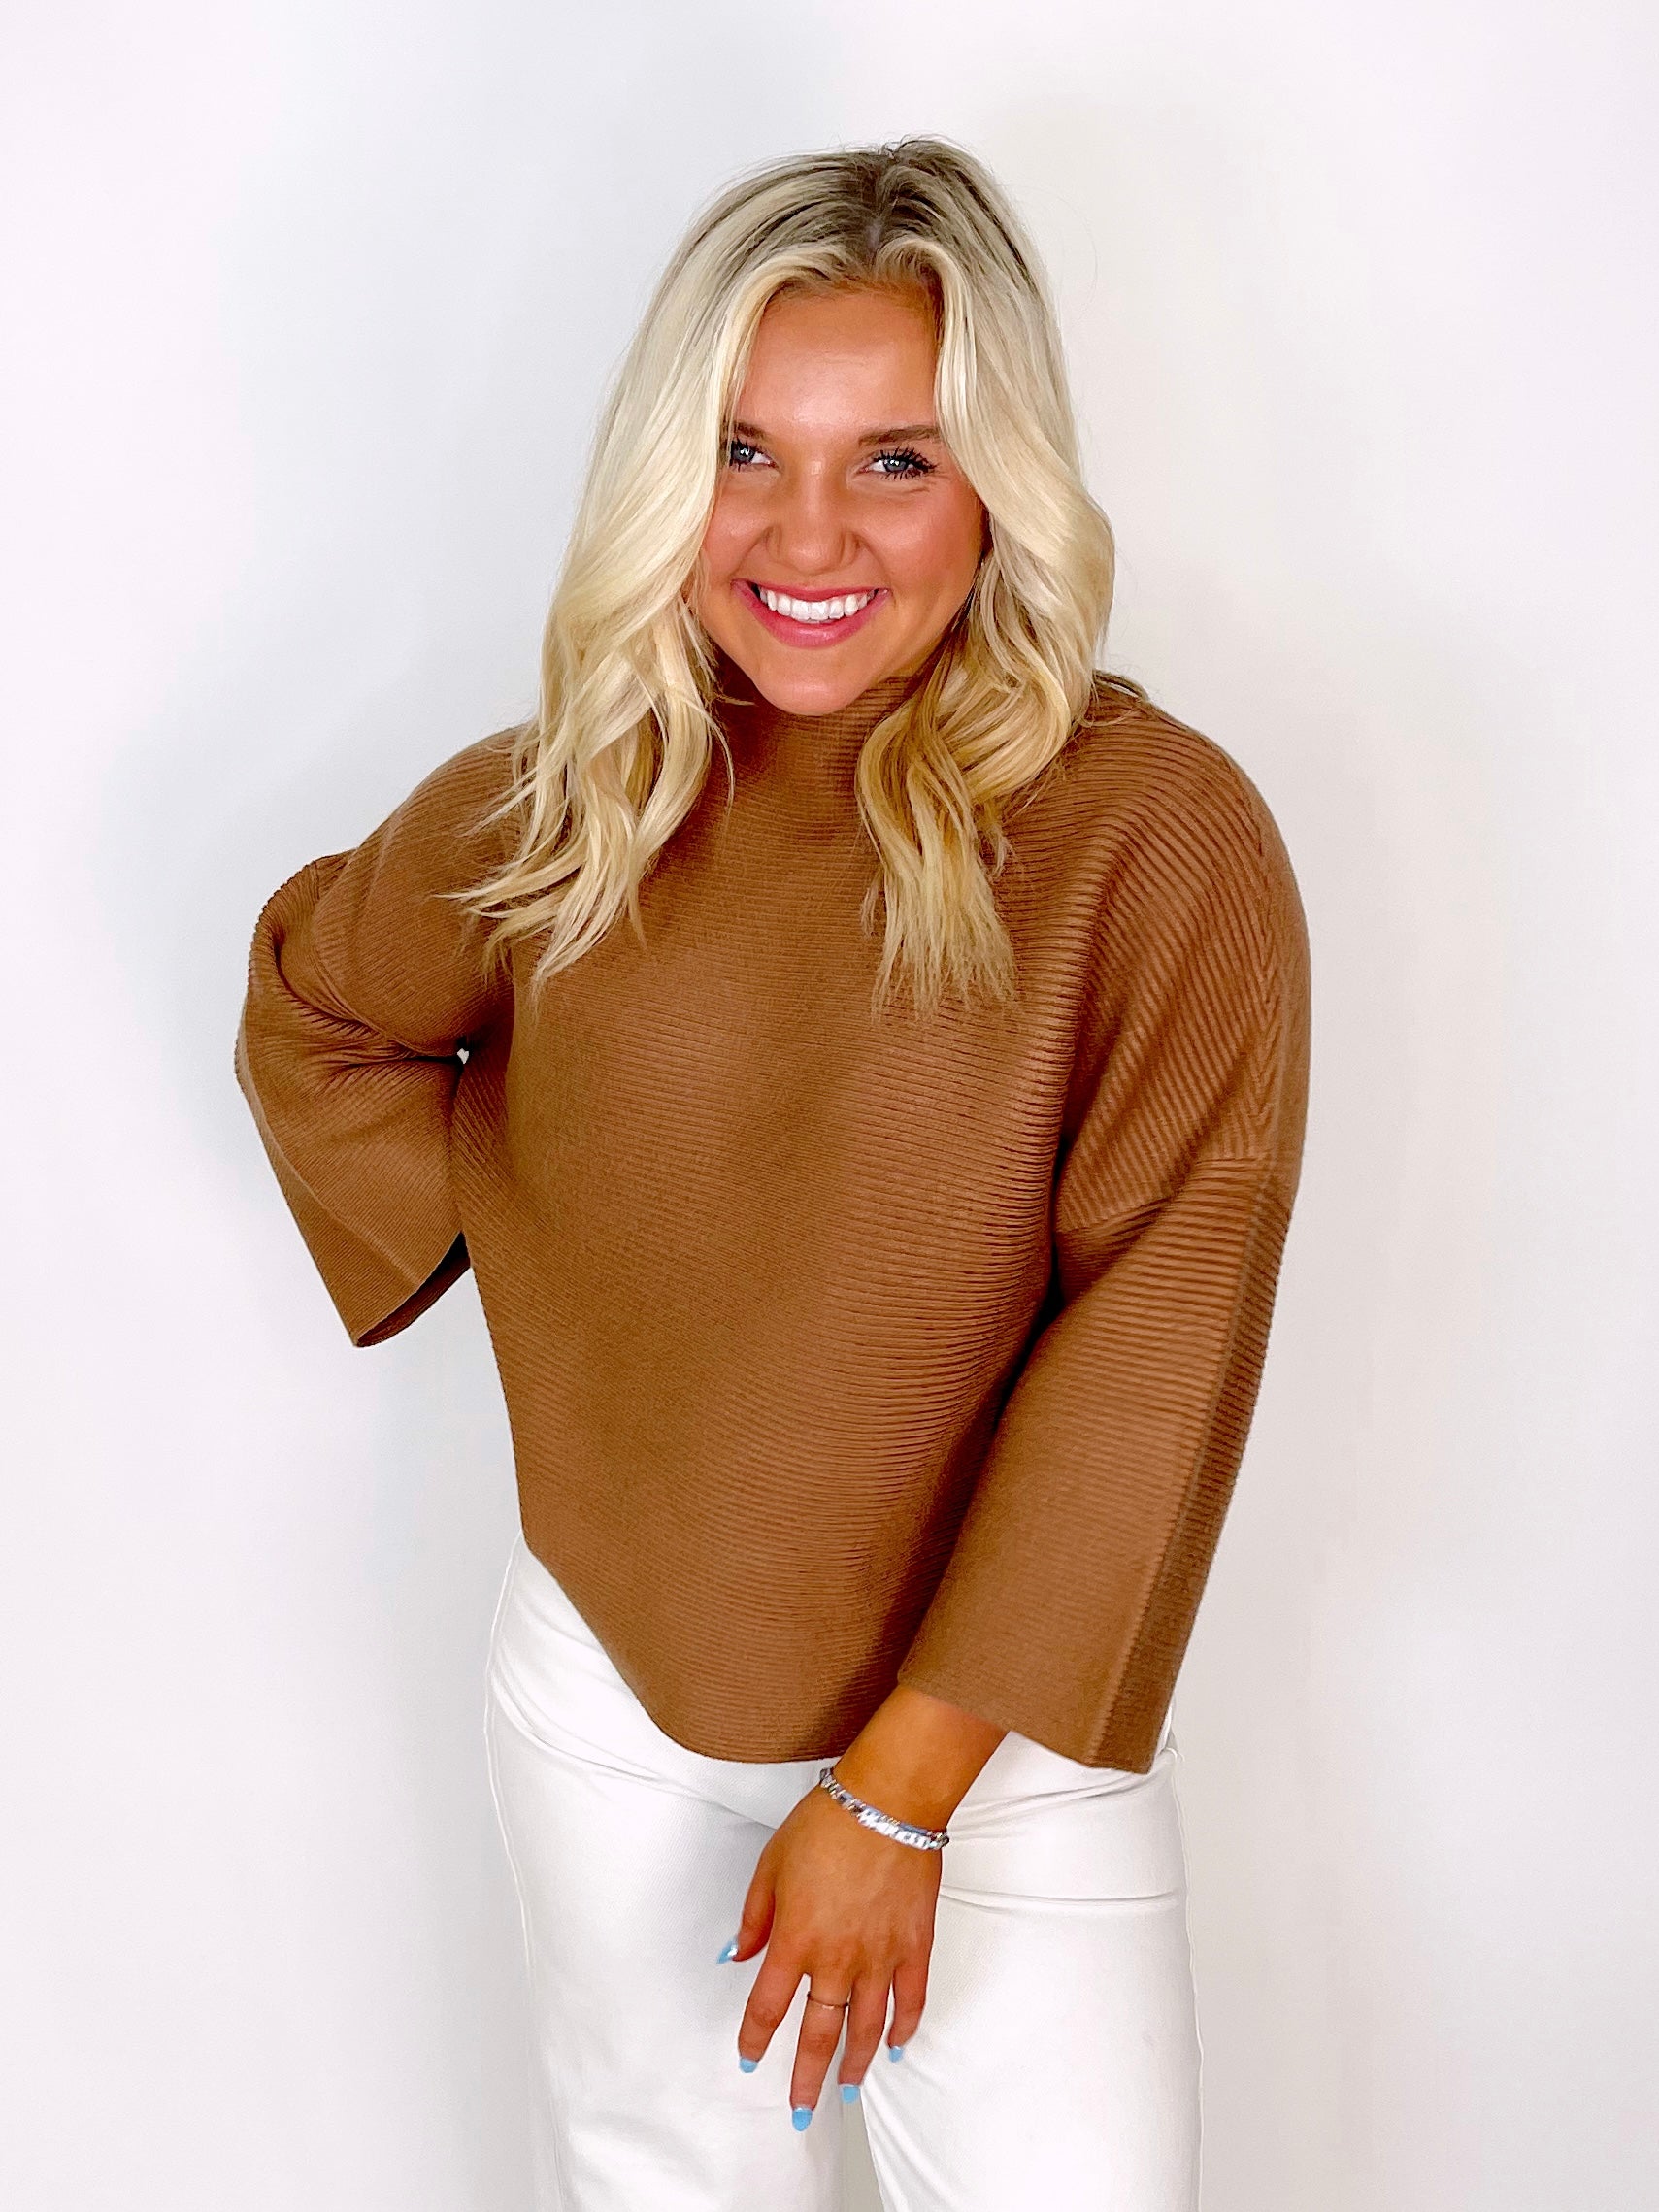 The Ellison Sweater-Sweaters-Ellison-The Village Shoppe, Women’s Fashion Boutique, Shop Online and In Store - Located in Muscle Shoals, AL.